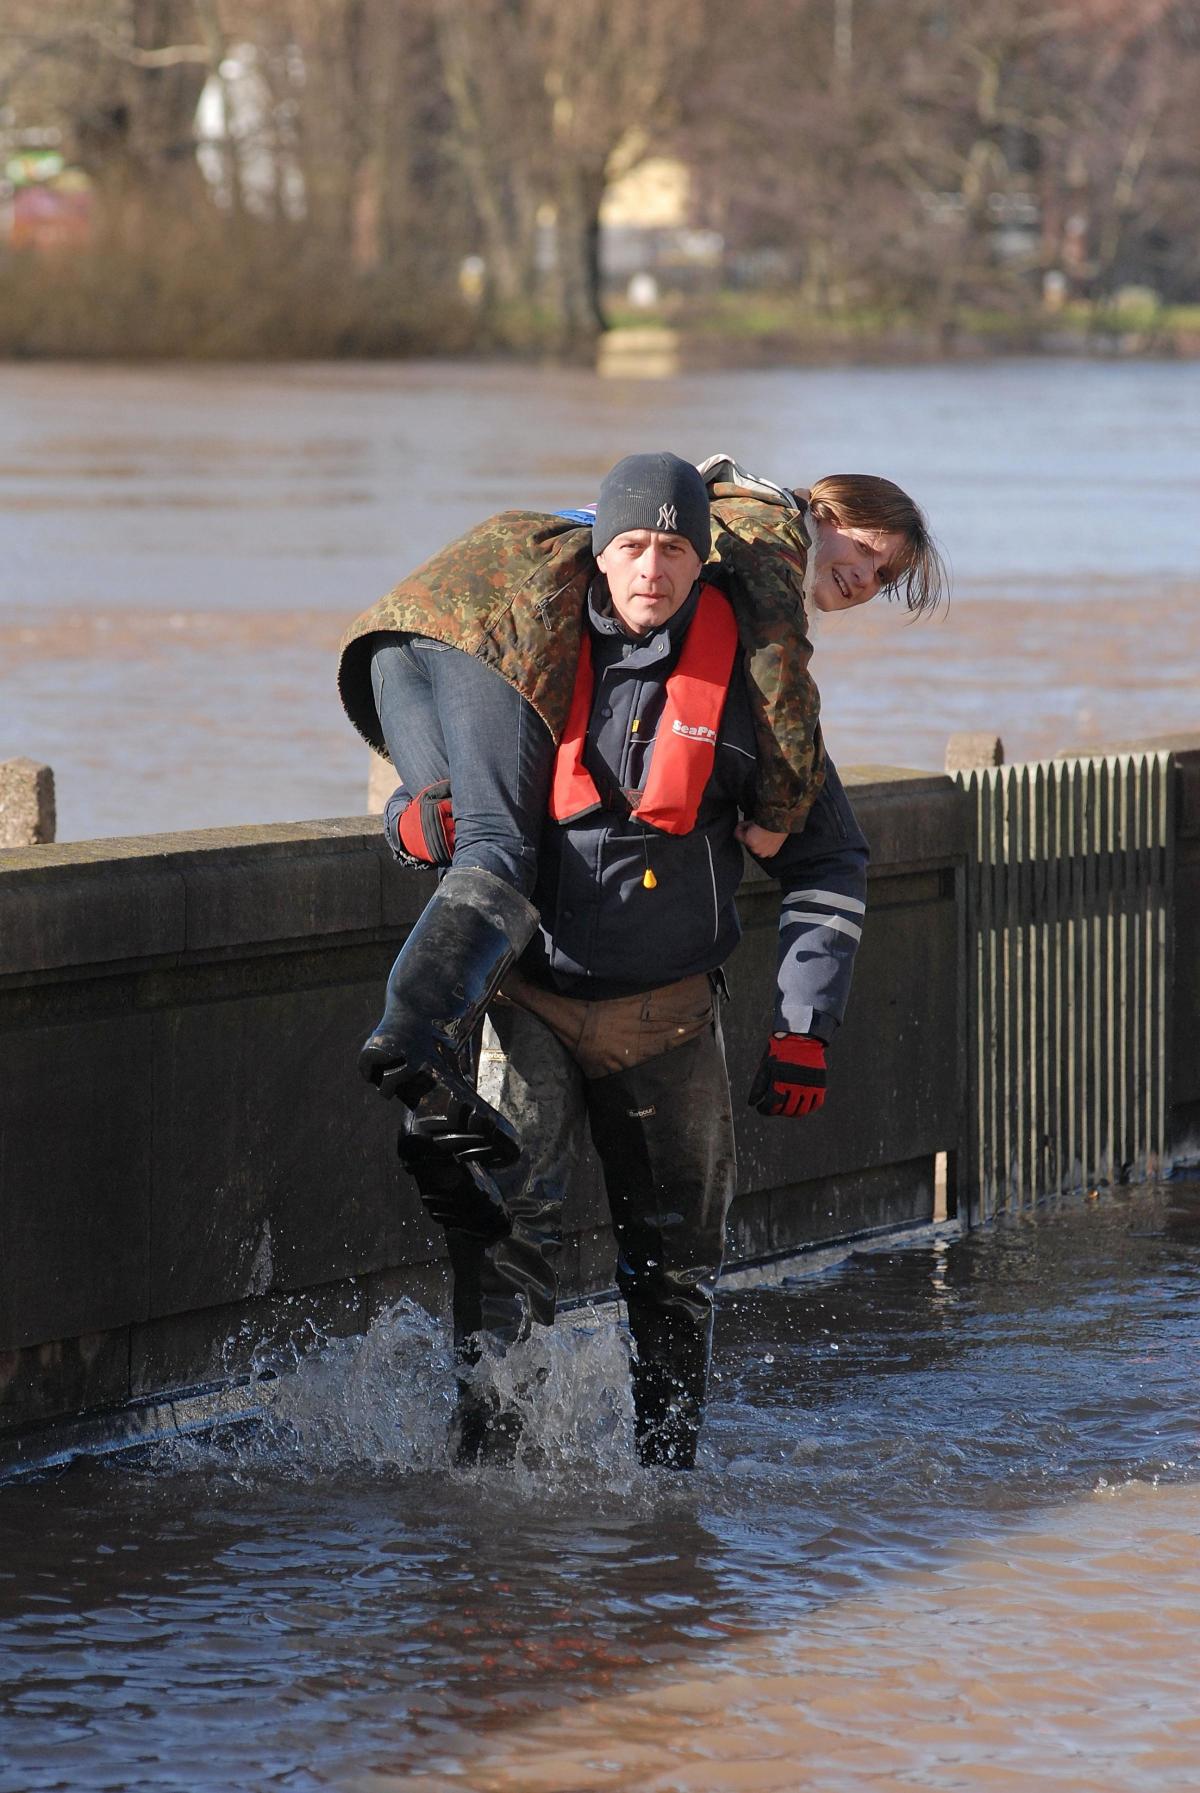  A man carries a woman through the flood water on North Parade.0714520549